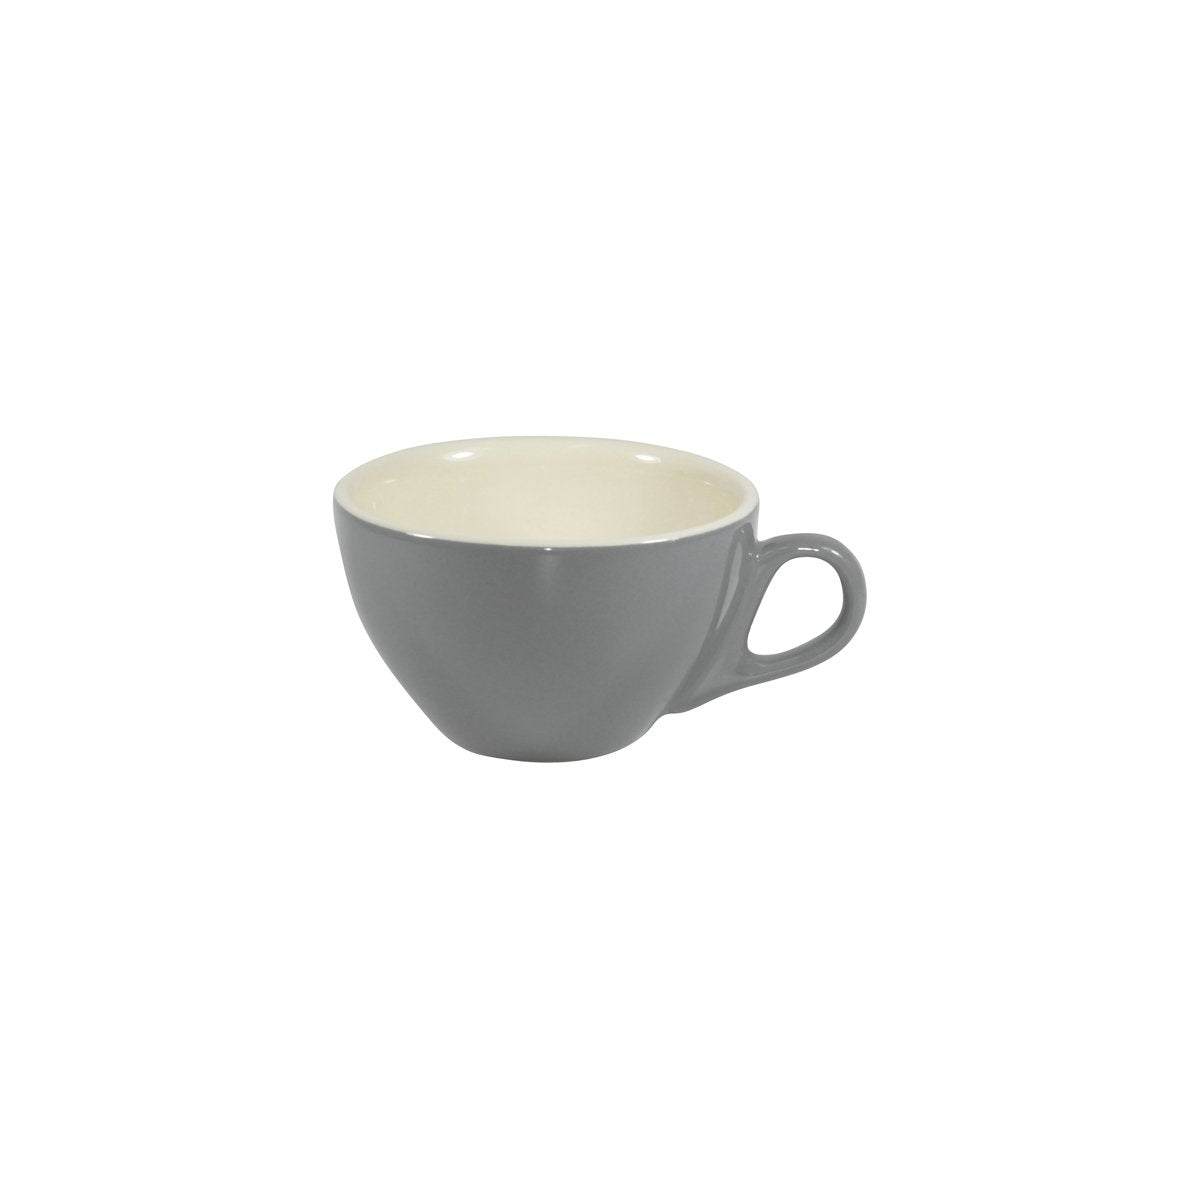 BW0530 Brew French Grey Cappuccino Cup 220ml Tomkin Australia Hospitality Supplies